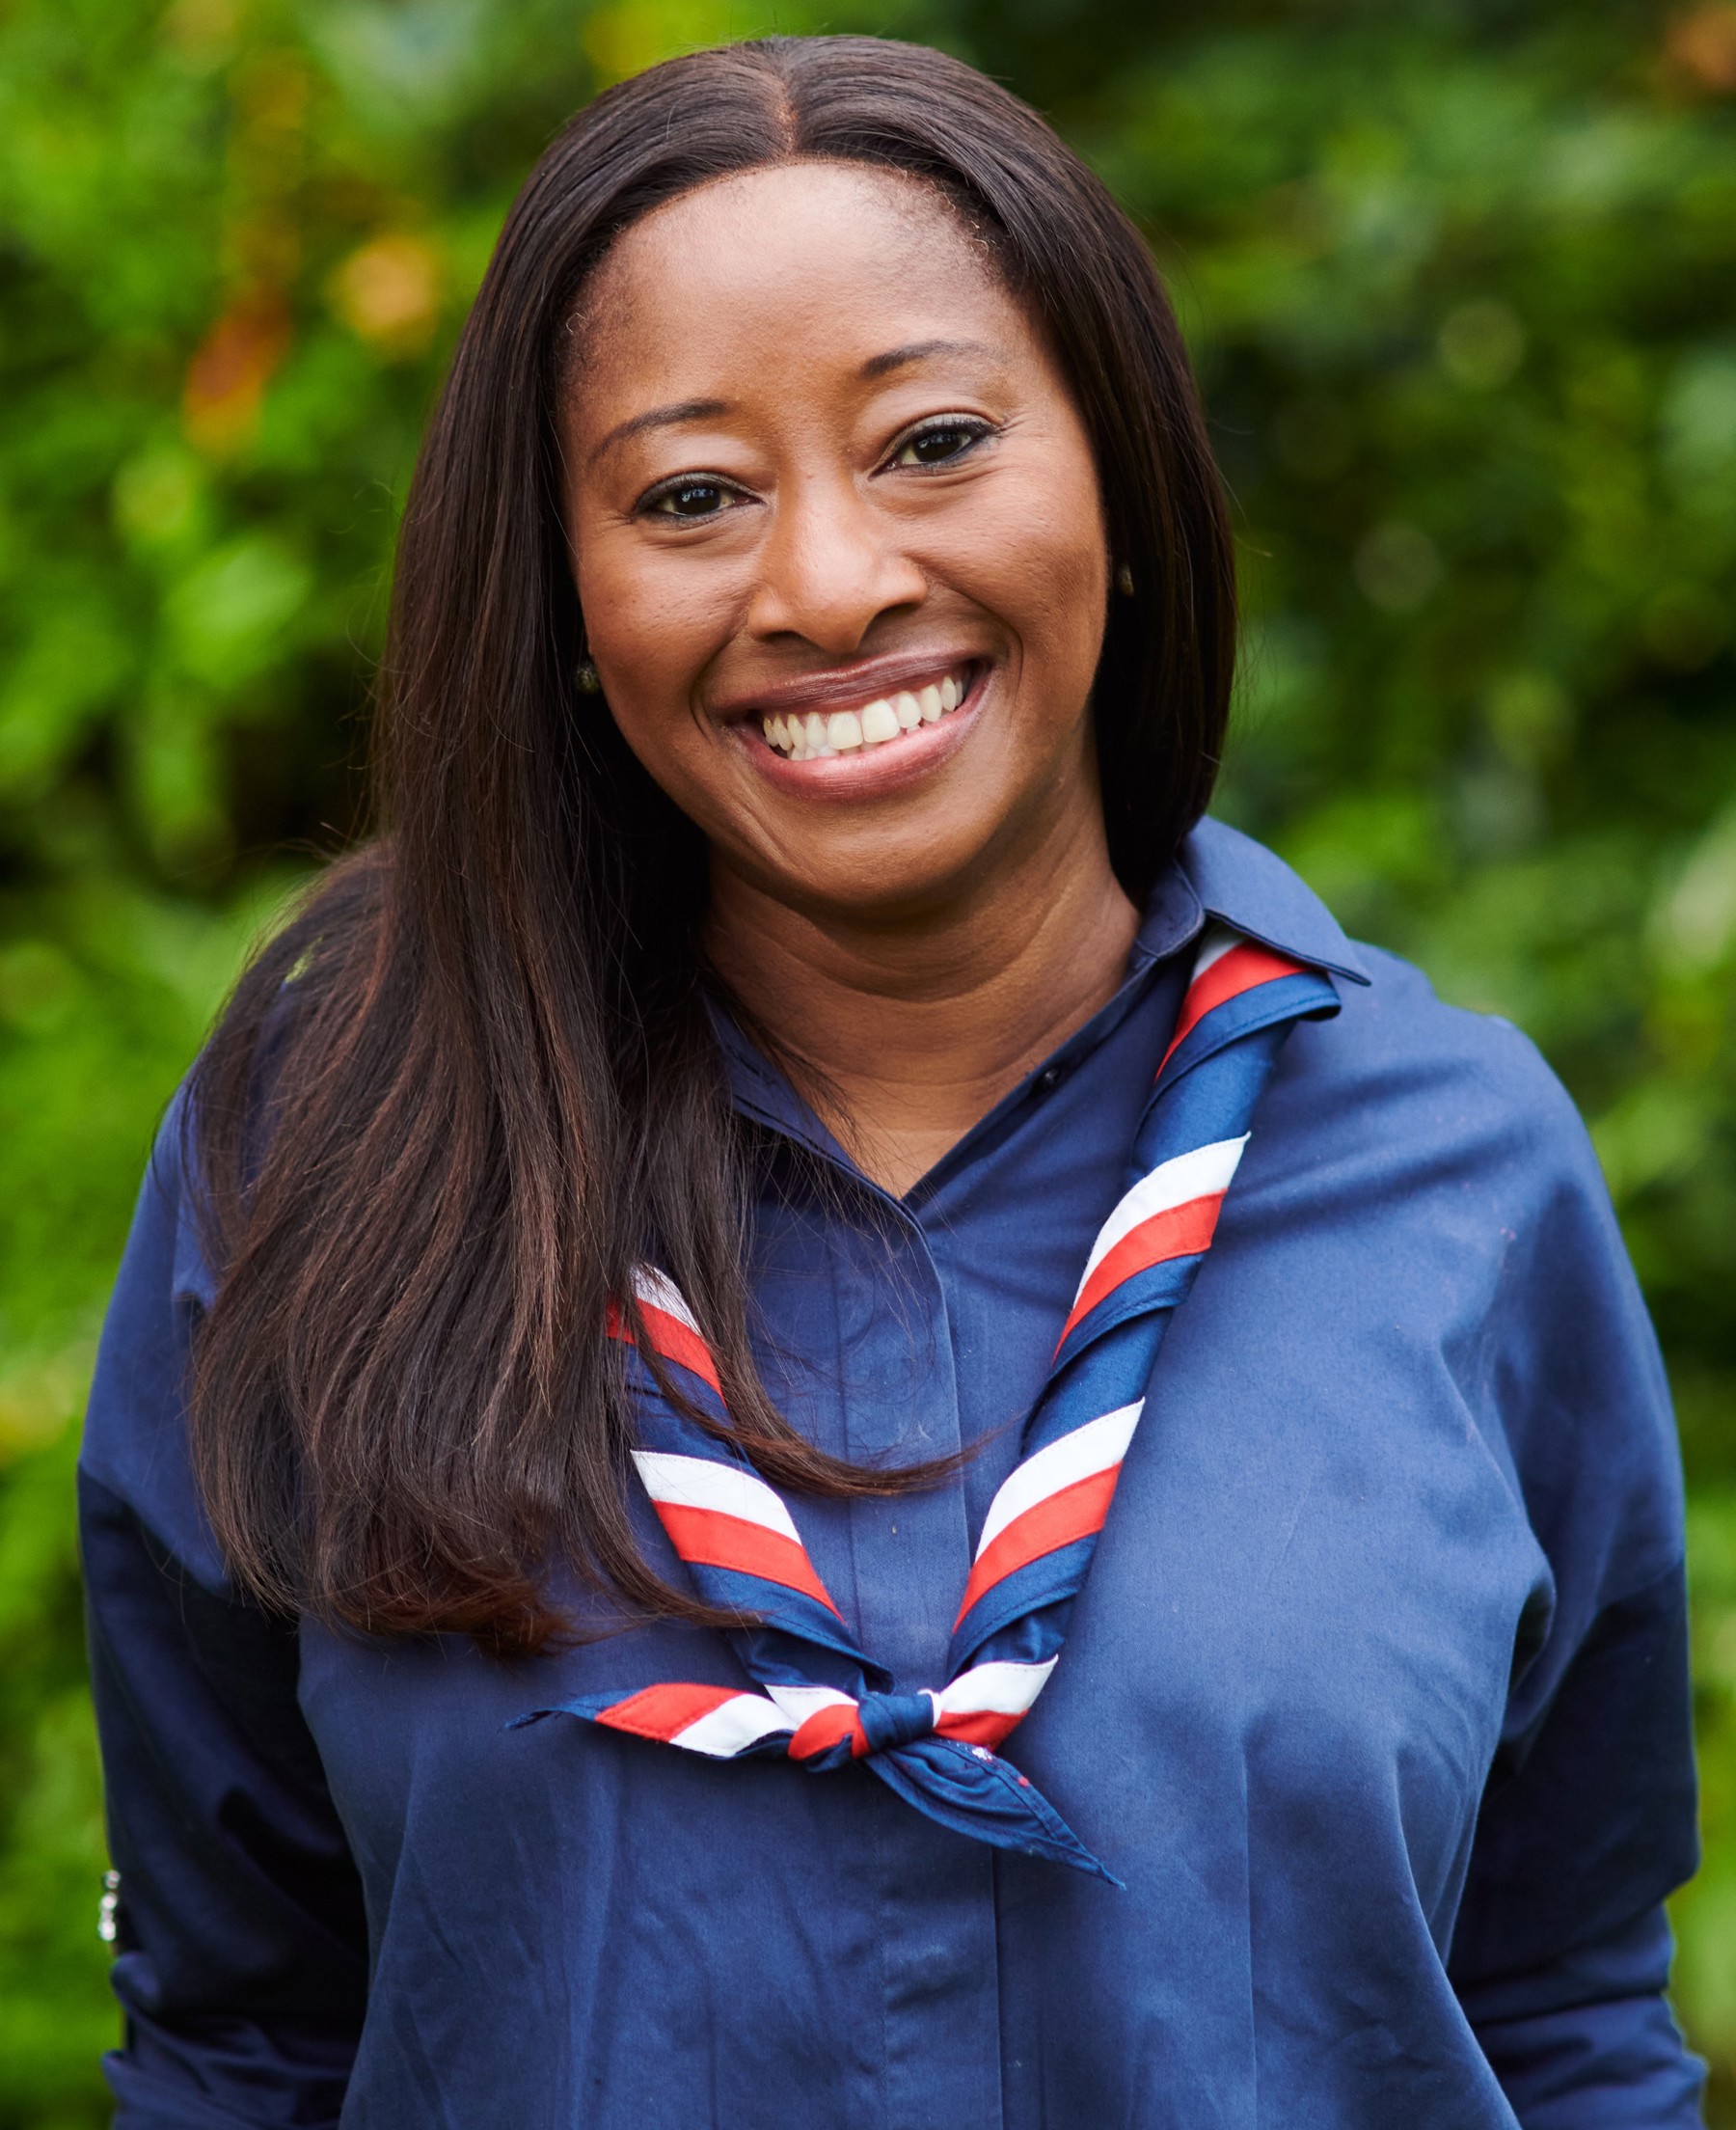 Busola Sodeinde smiling at the camera wearing a navy shirt and stripy scarf